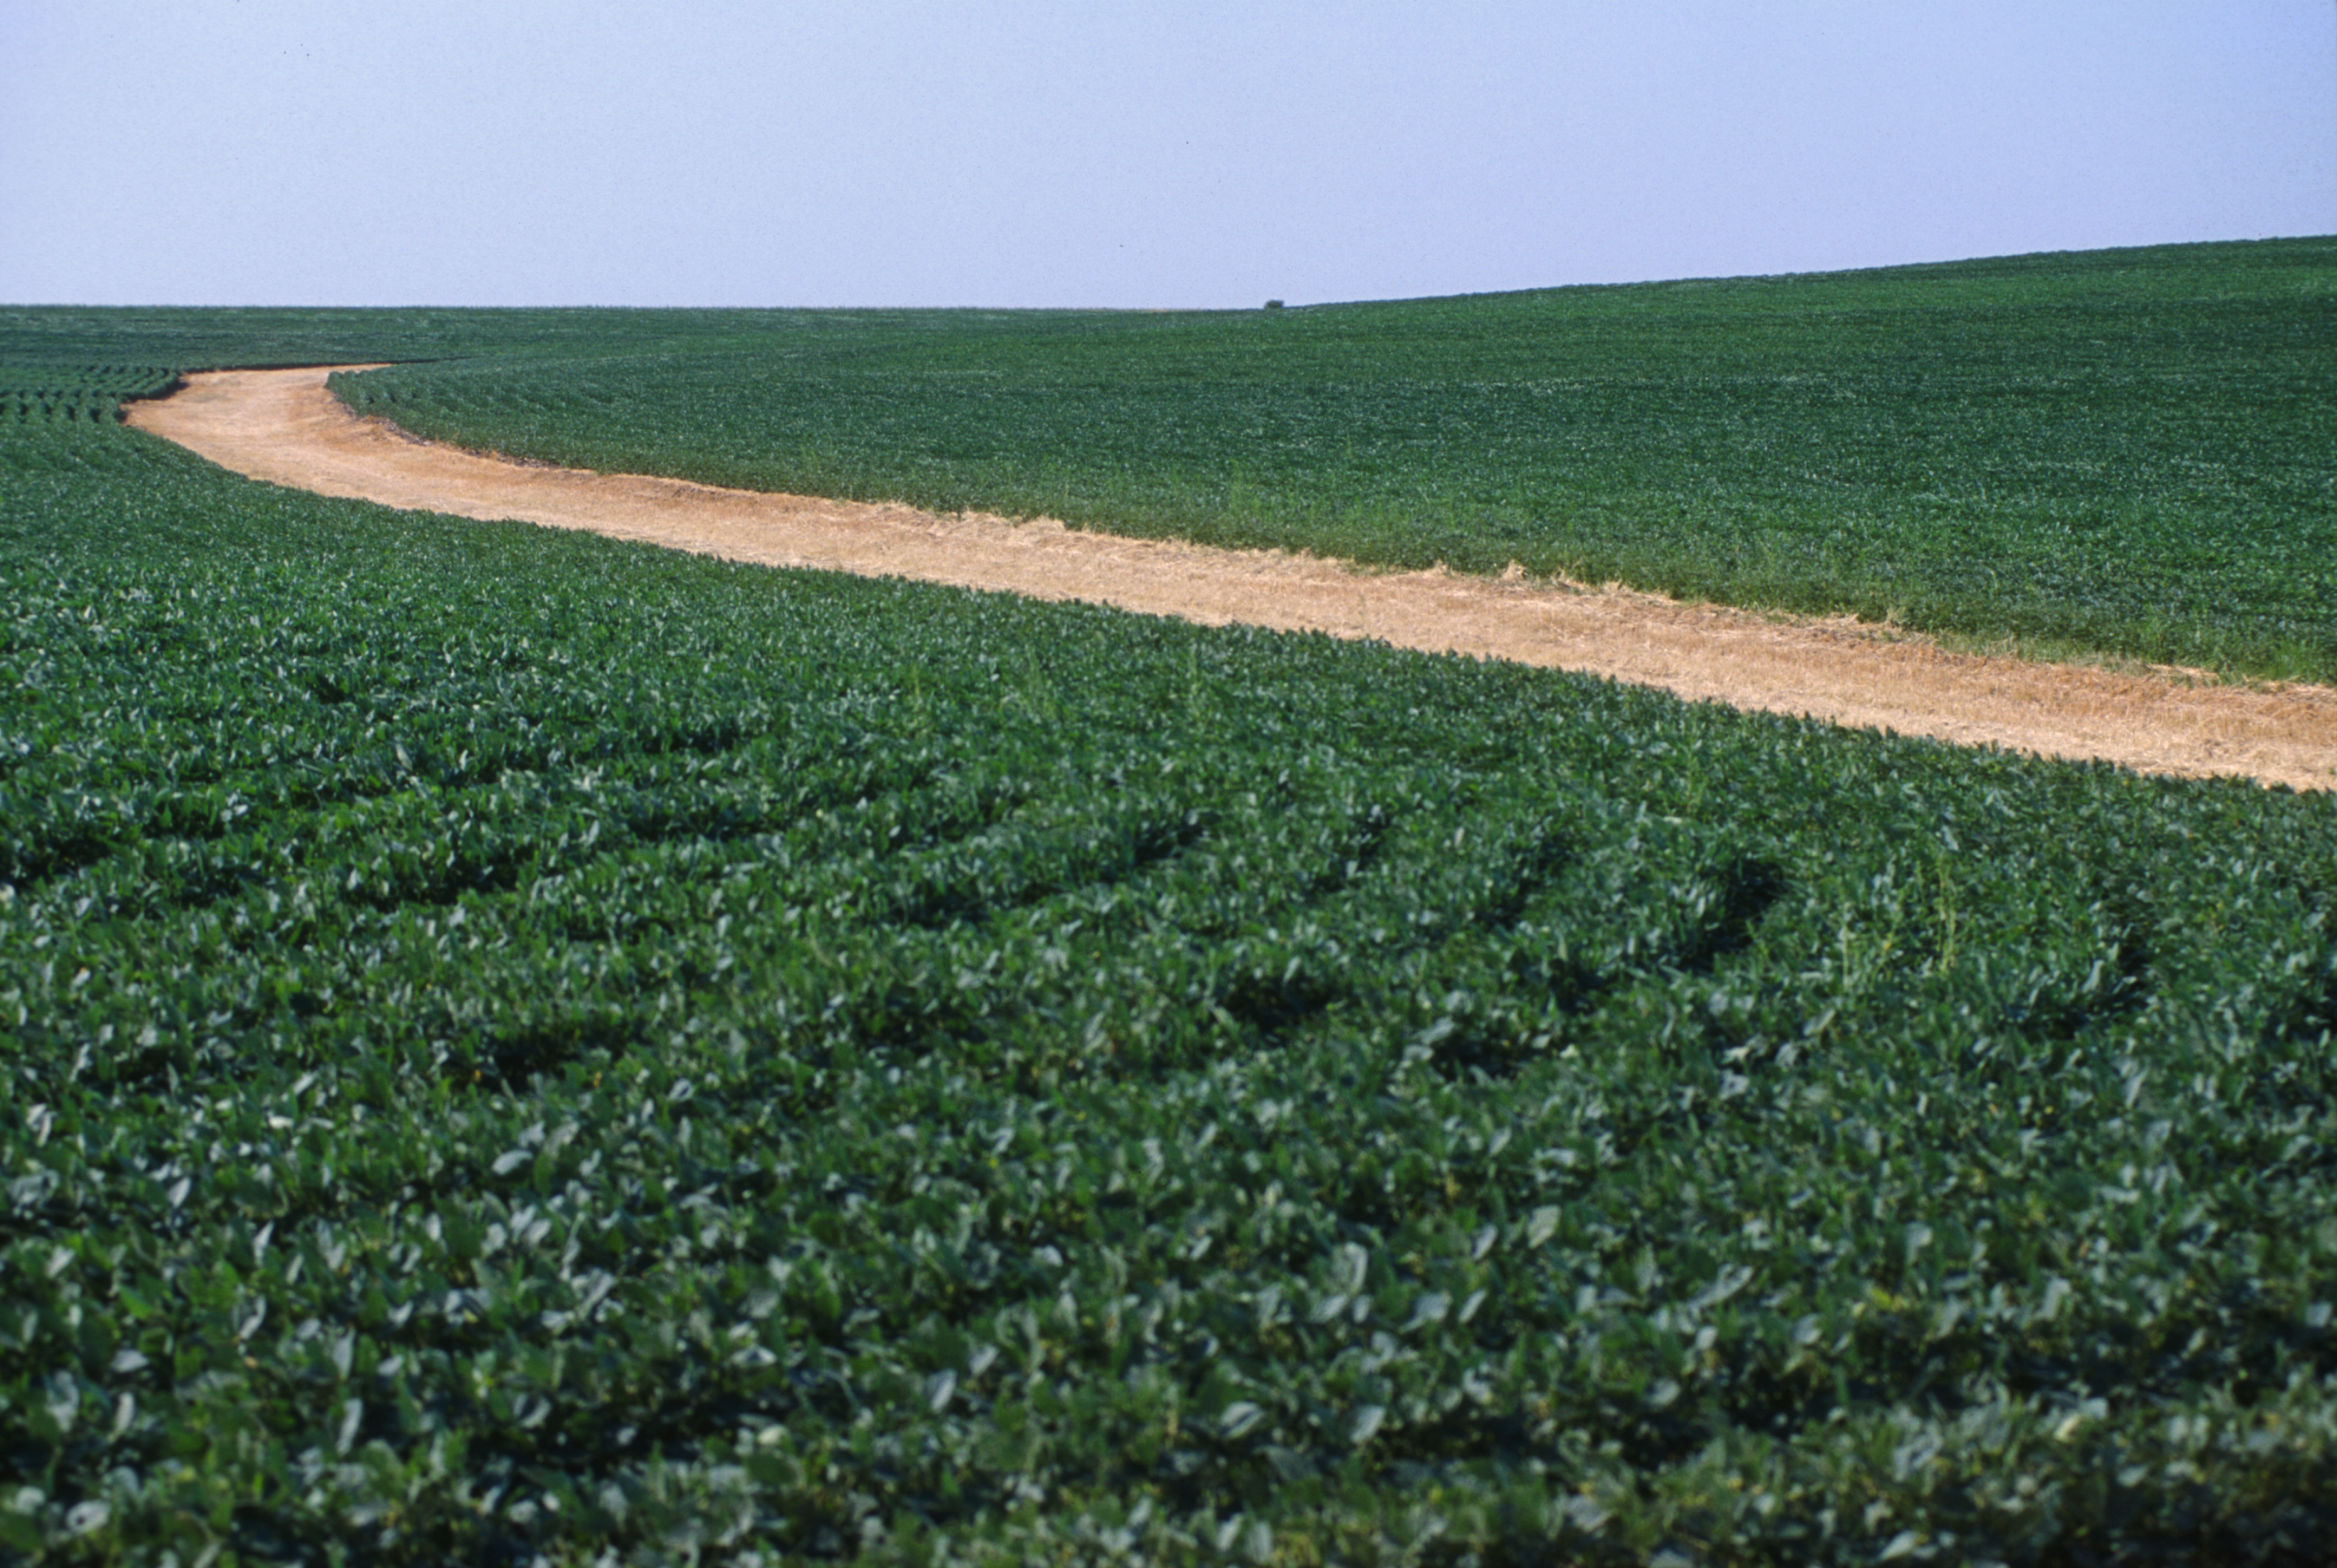 Average soybean yield in the north central region from 2010-2014 was 43 bushels per acre, yet some producers reached soybean yields over 80 bushels per acre. Nebraska researchers relied on producer data to identify causes of that yield gap. 